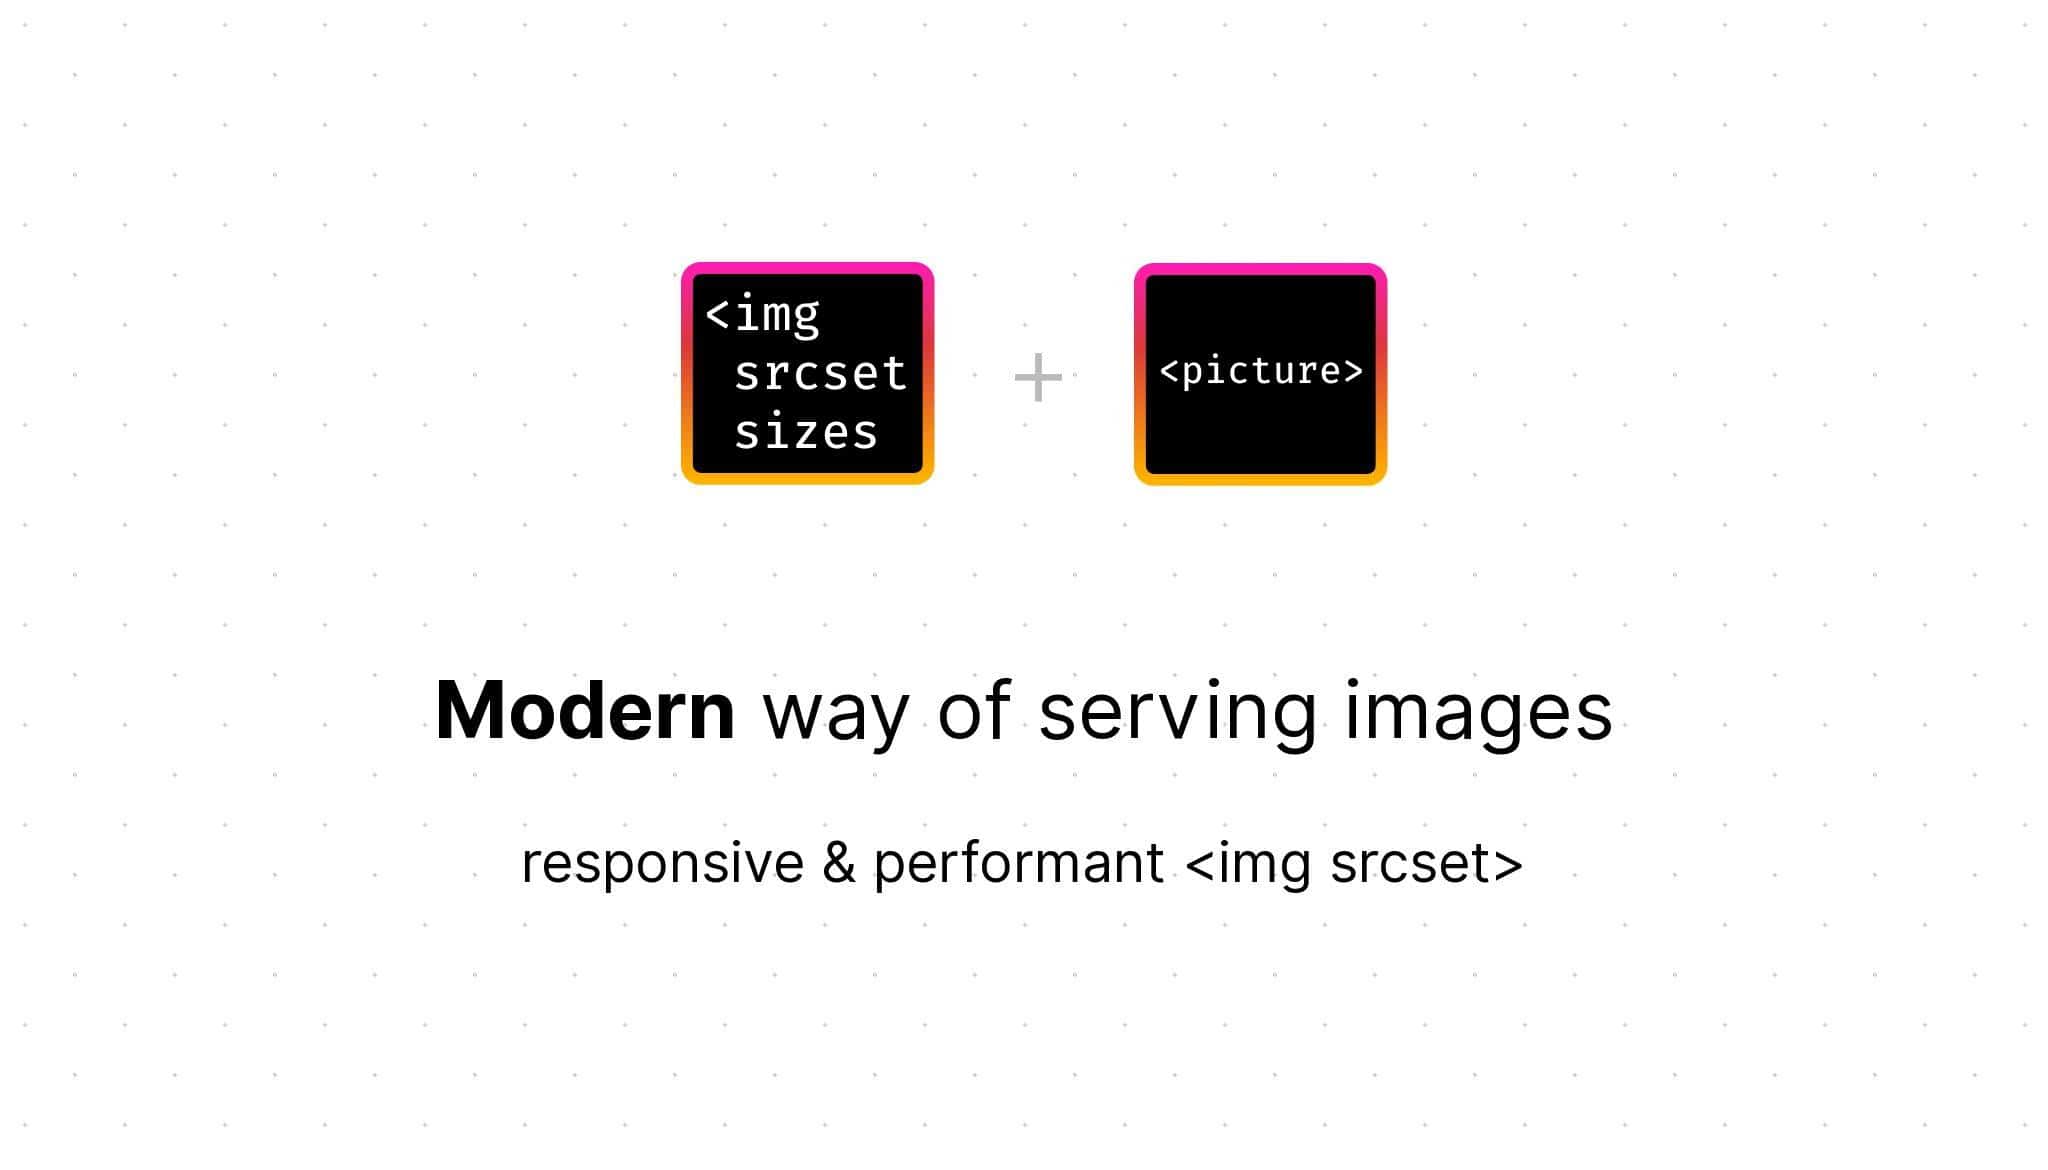 The modern way of serving images